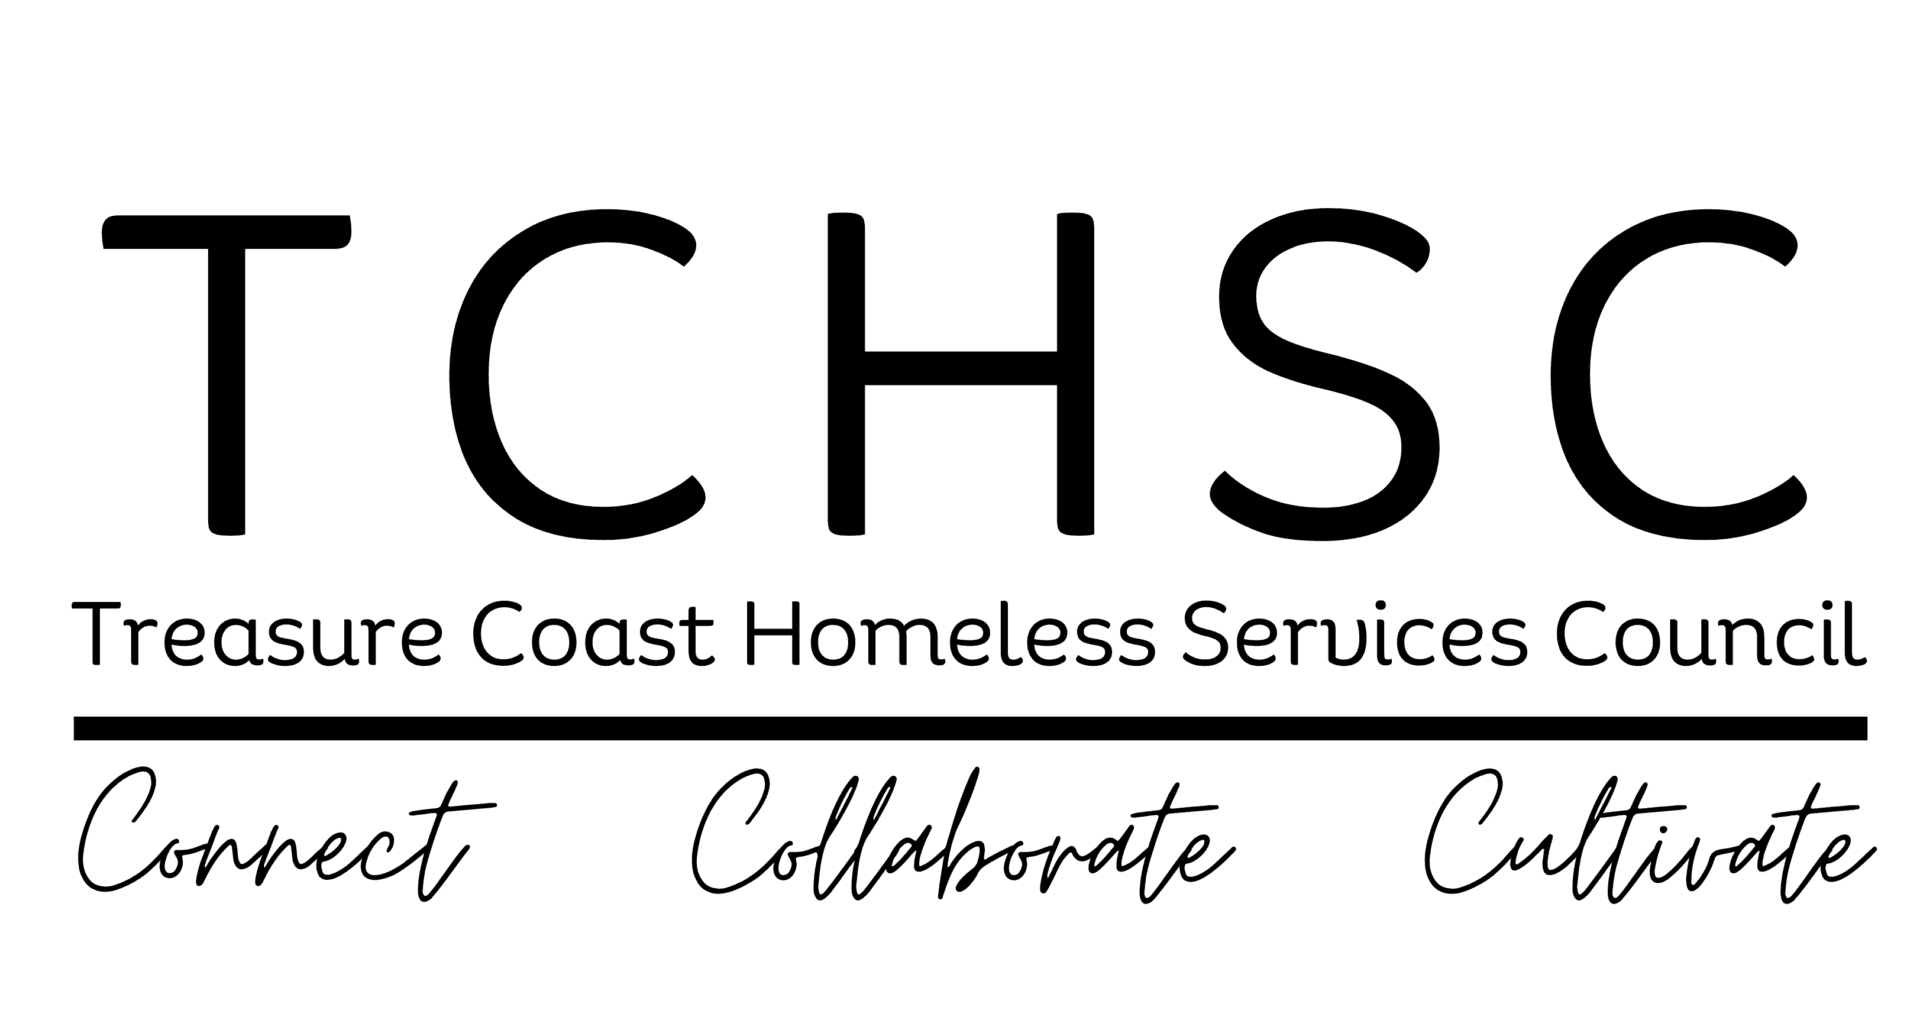 Catholic Charities Samaritan Center receives federal Emergency Food and Shelter Program Grant administered by the Treasure Coast Homeless Services Council.